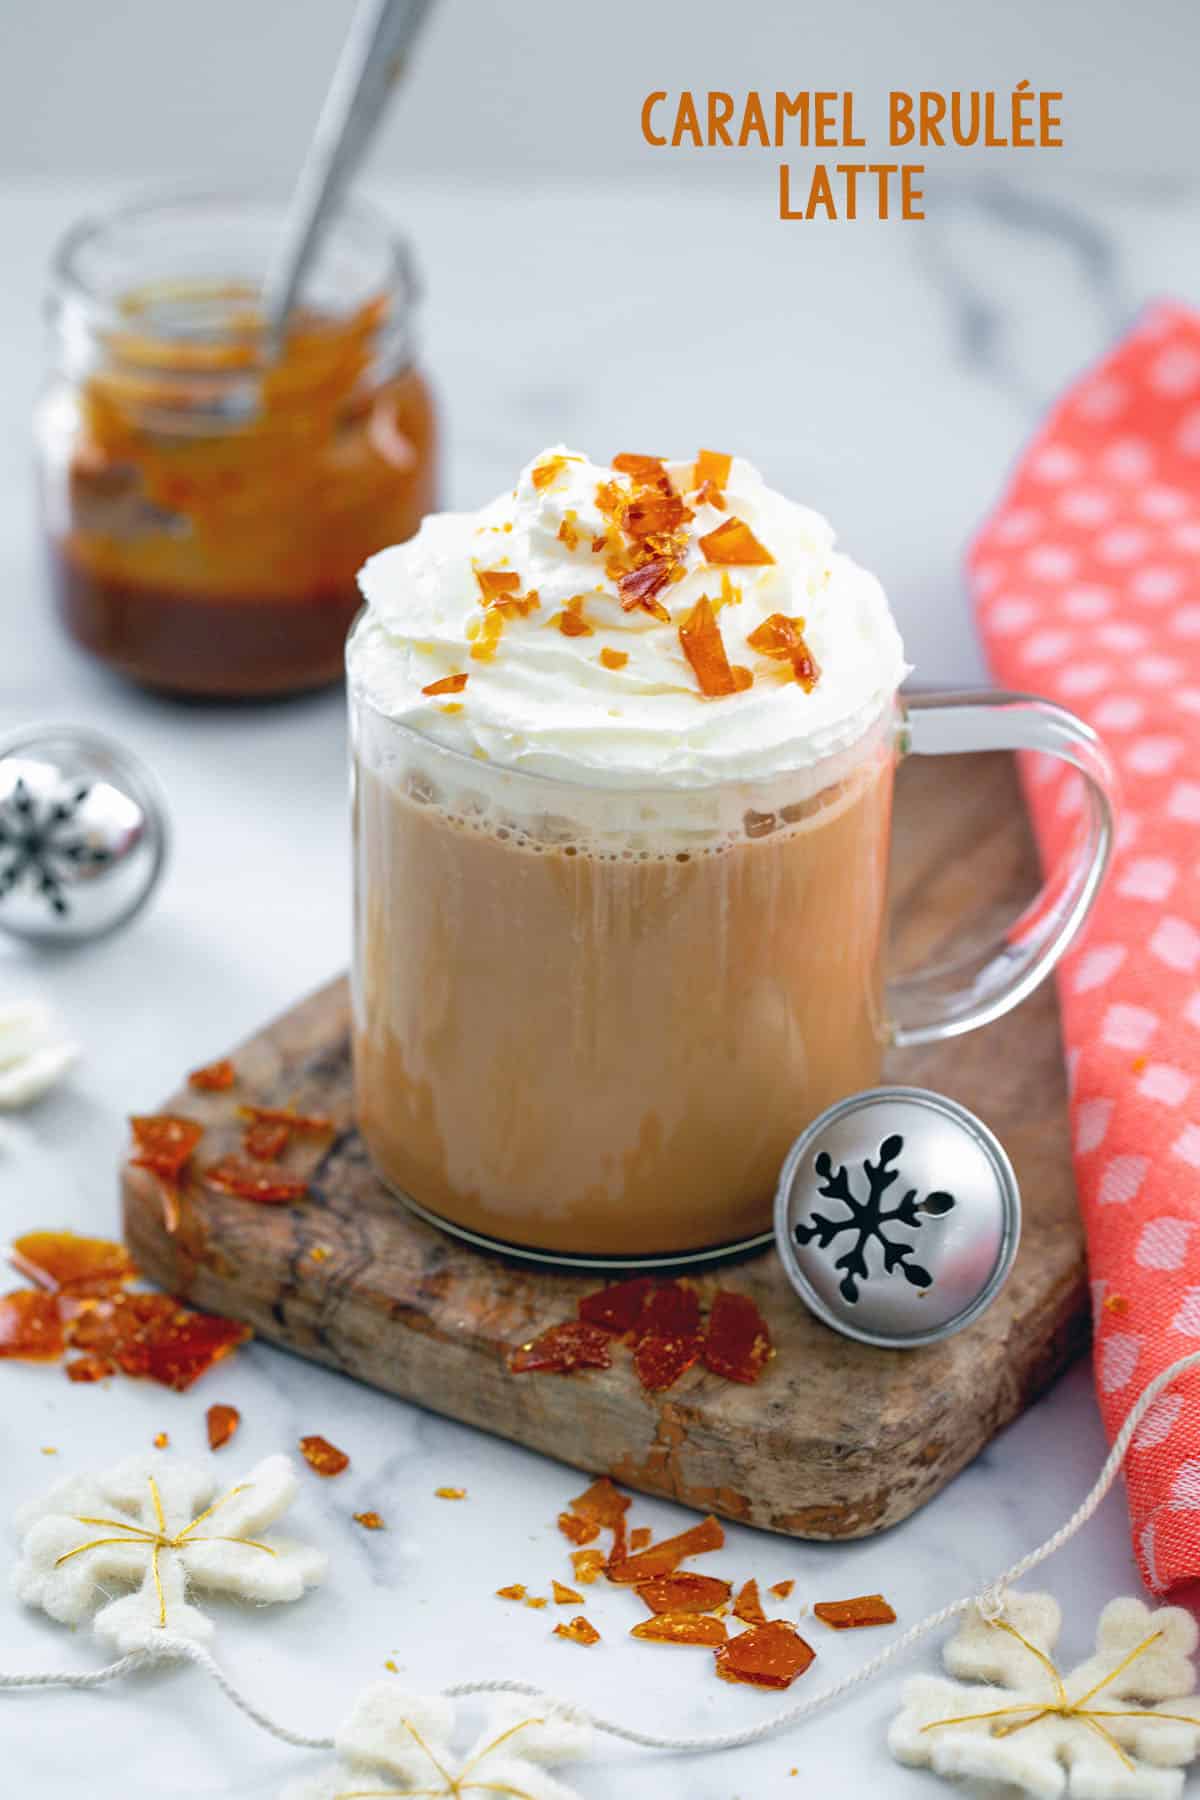 Mug with caramel brulée latte topped with whipped cream and brulée pieces with jar of caramel in background and recipe title at top.